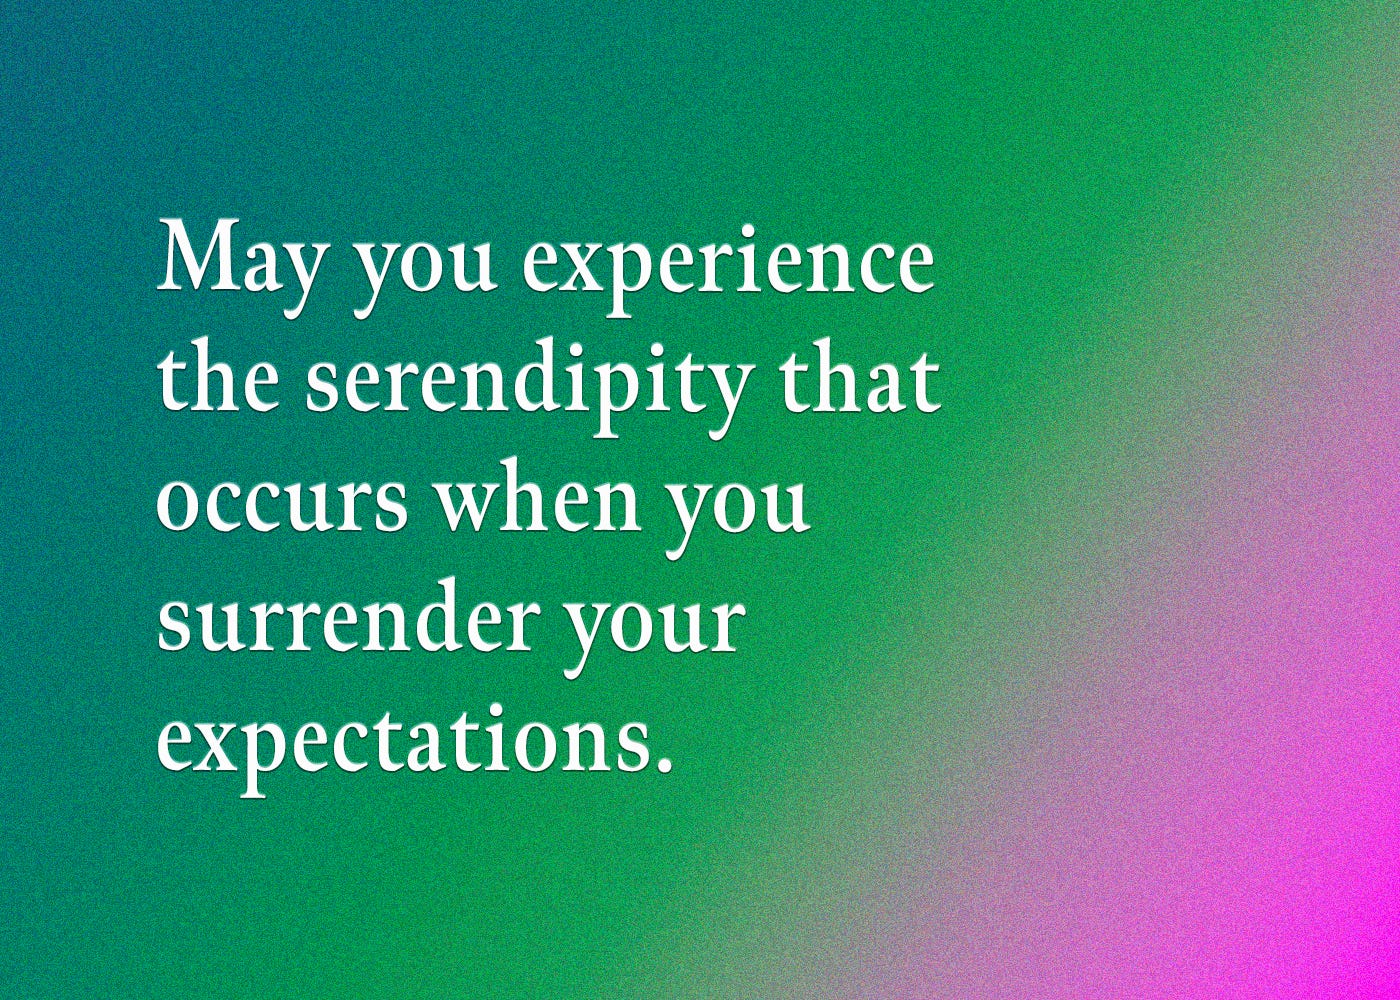 May you experience the serendipity that occurs when you surrender your expectations